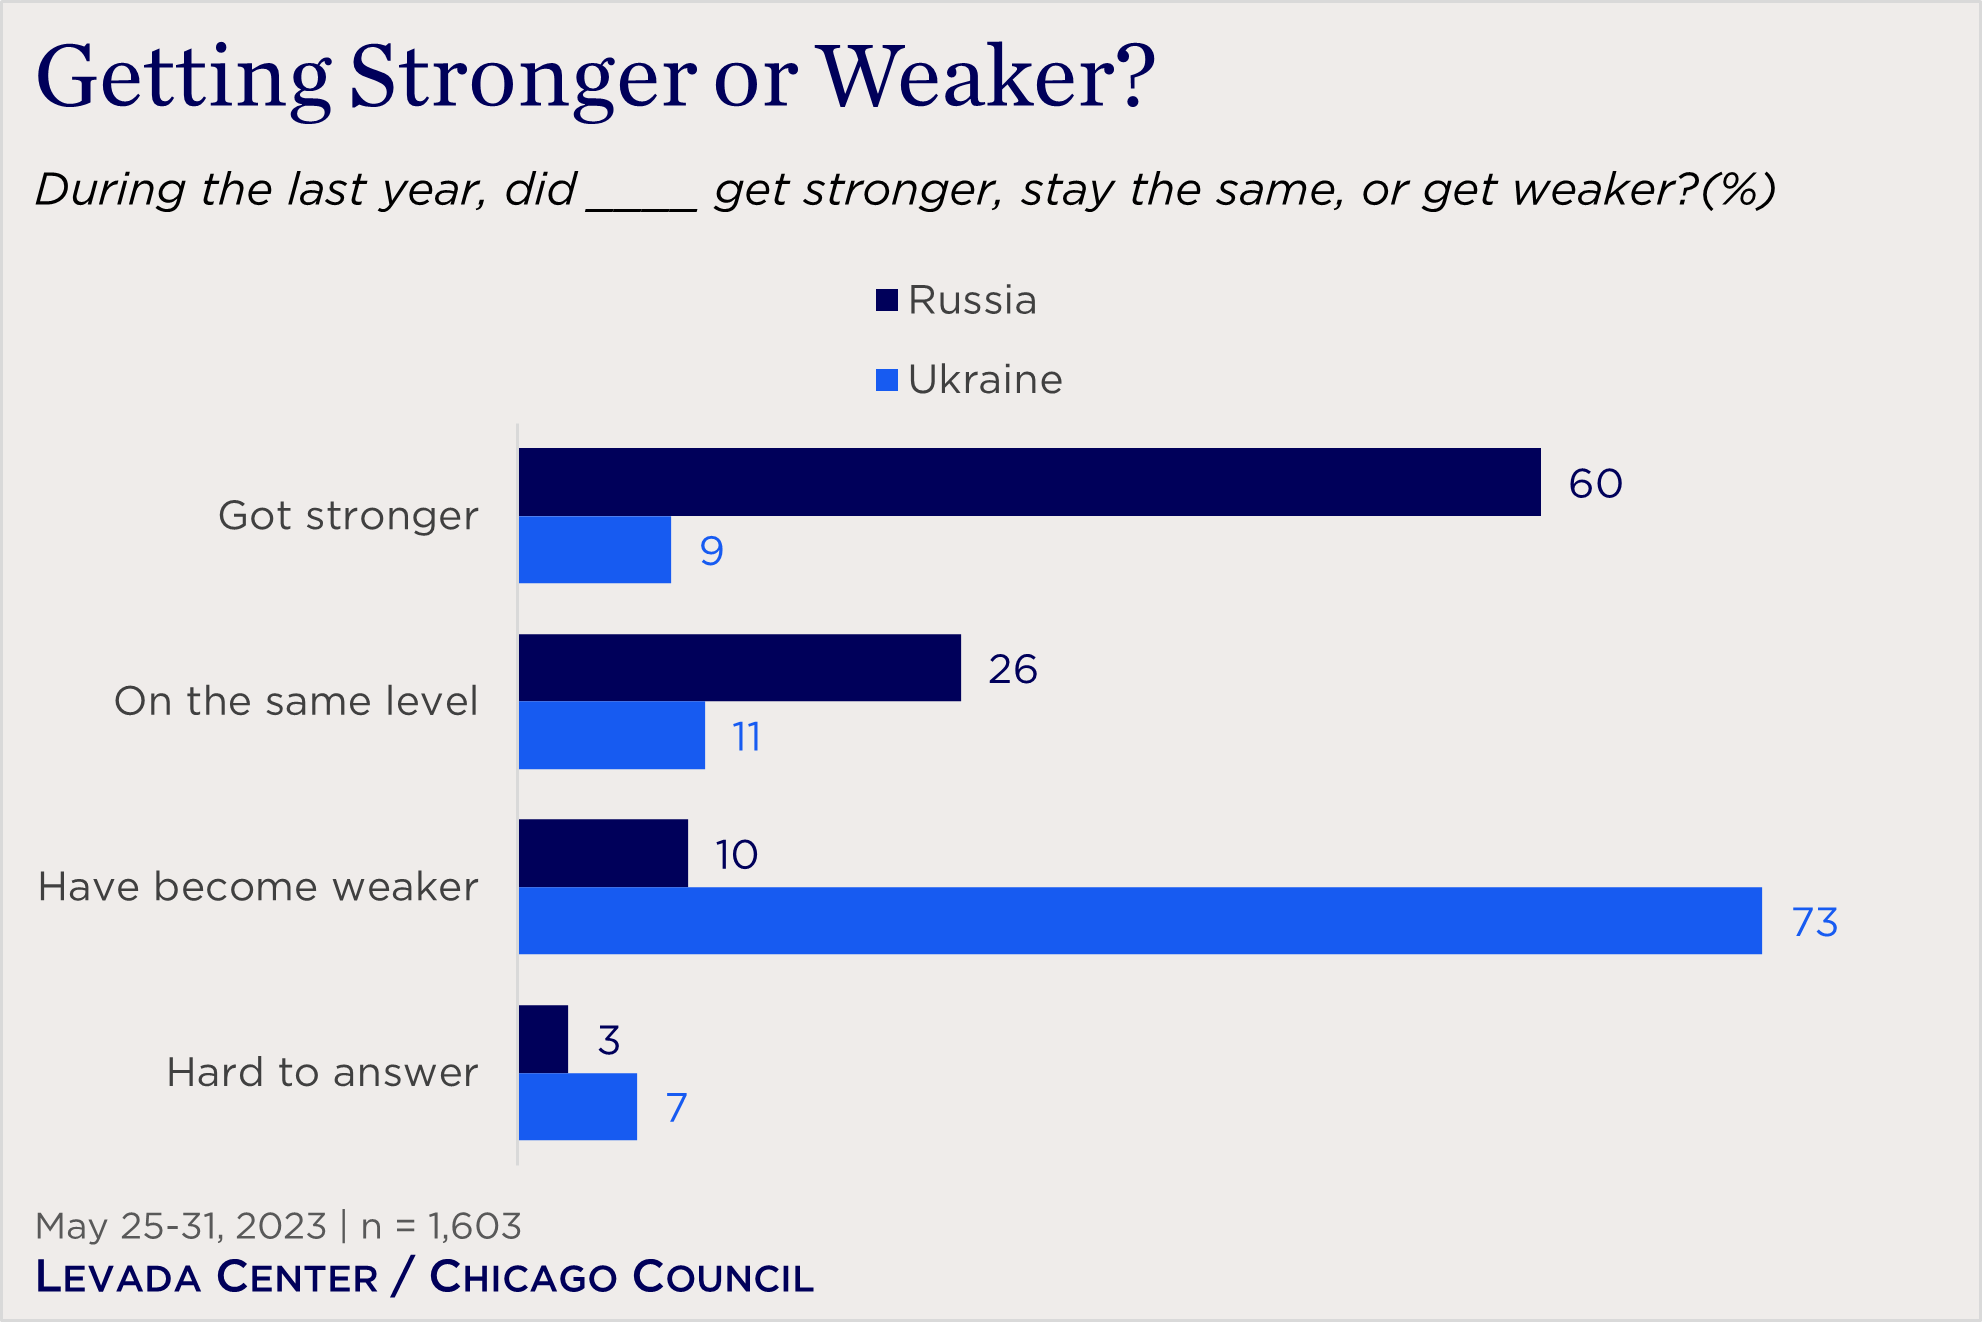 bar chart showing views of whether Russia and Ukraine have gotten stronger or weaker